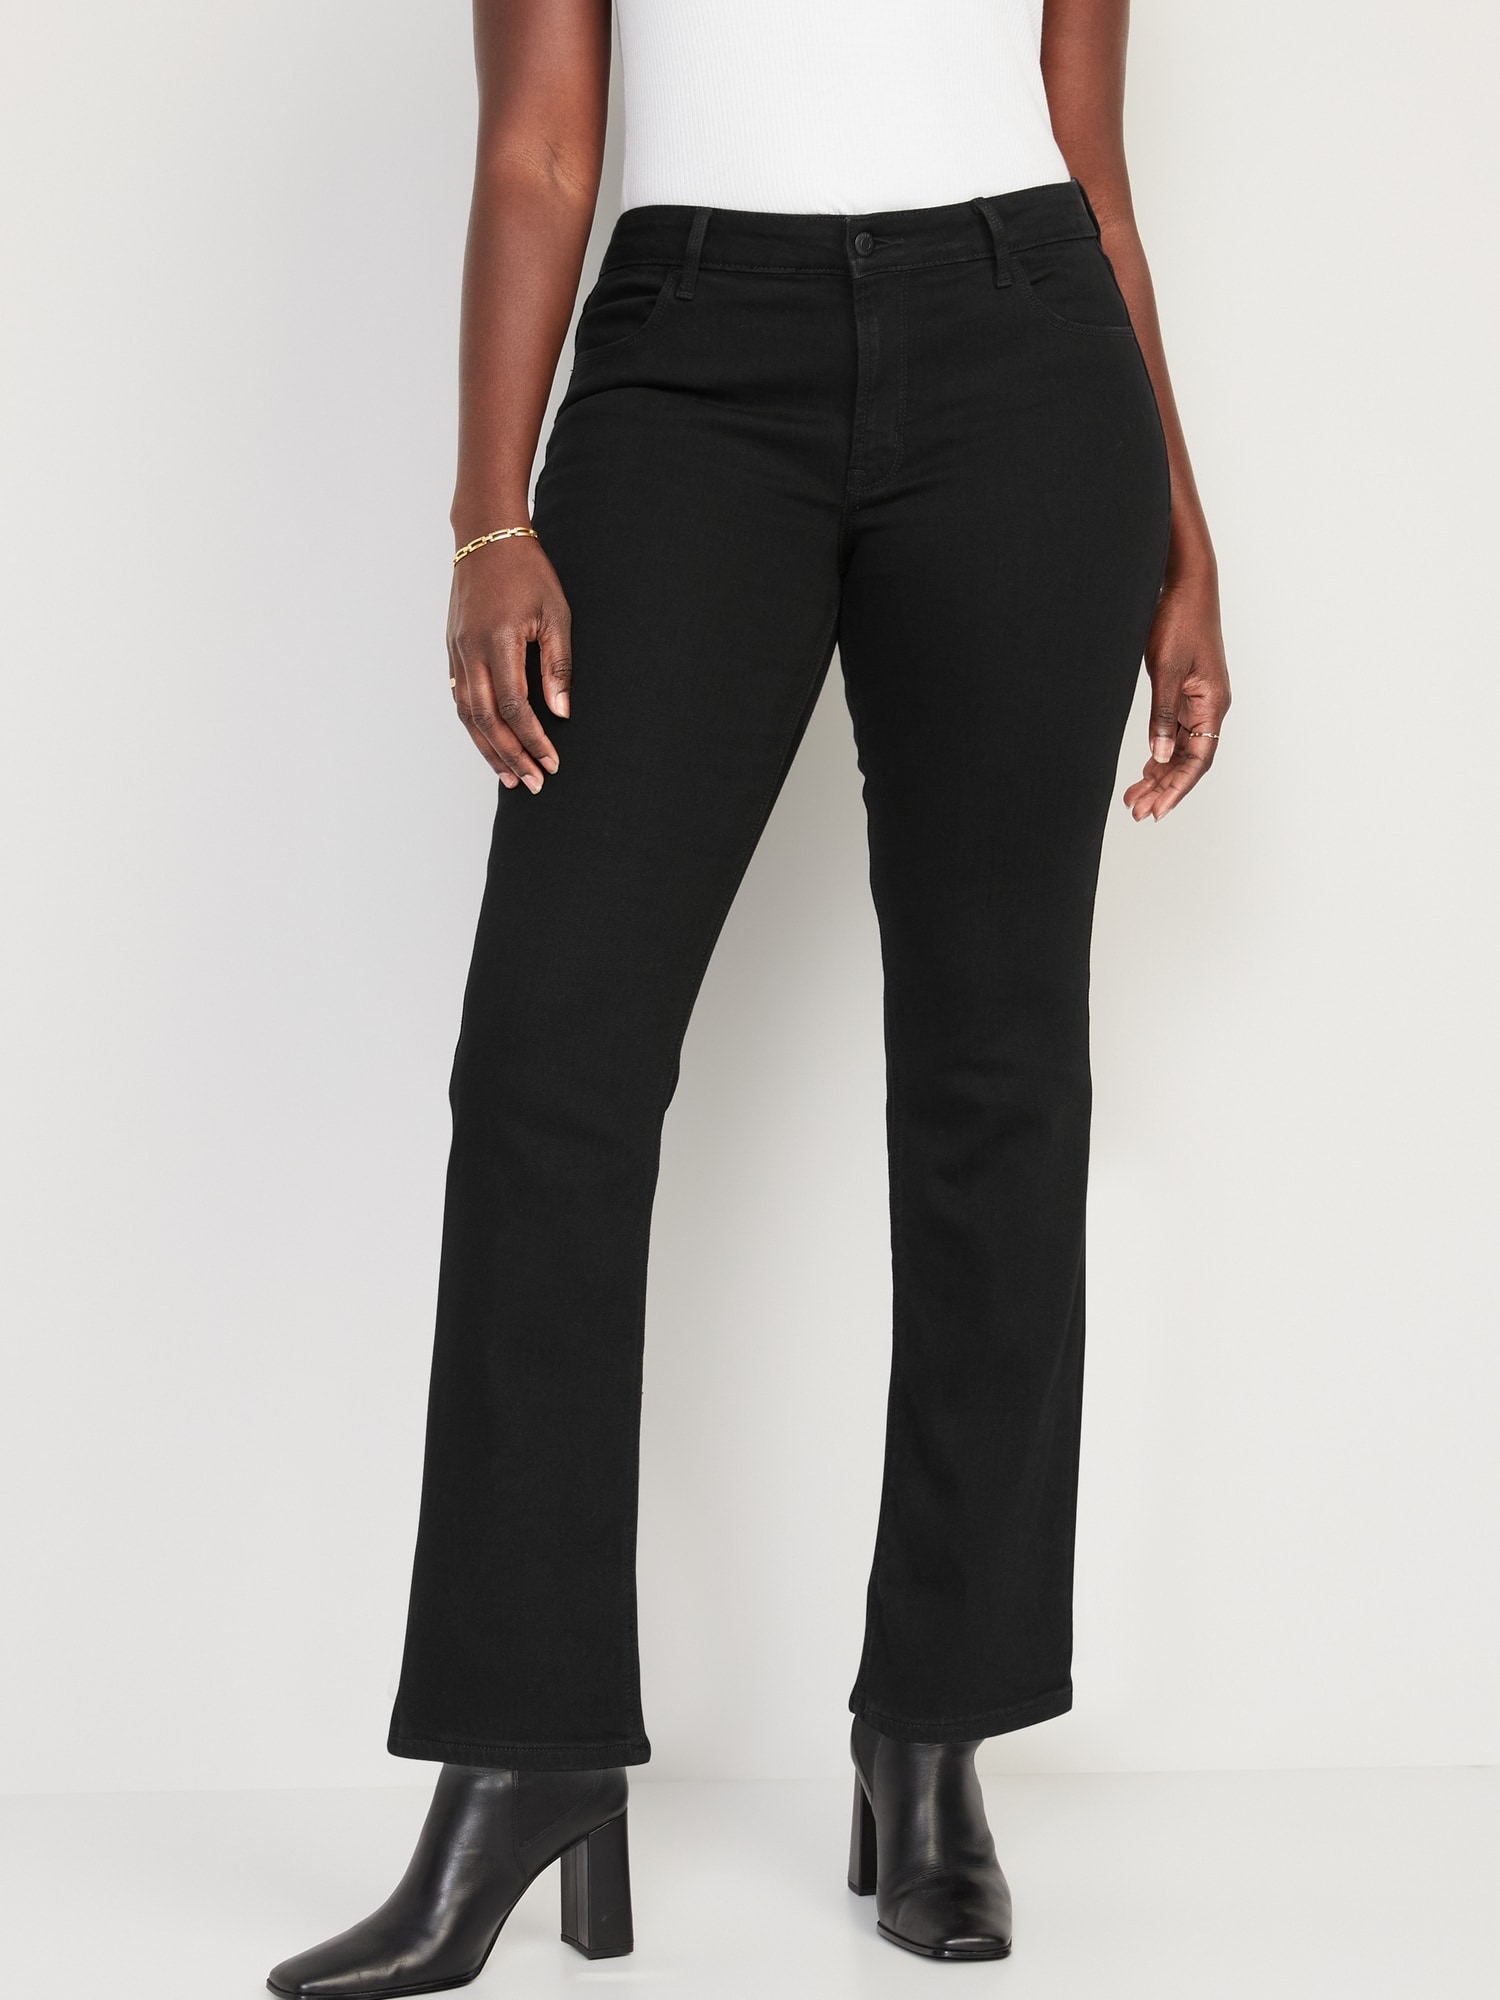 Old Navy Bootcut Cropped Black Pants Women's size 14 - $14 - From  ThePoshJawn